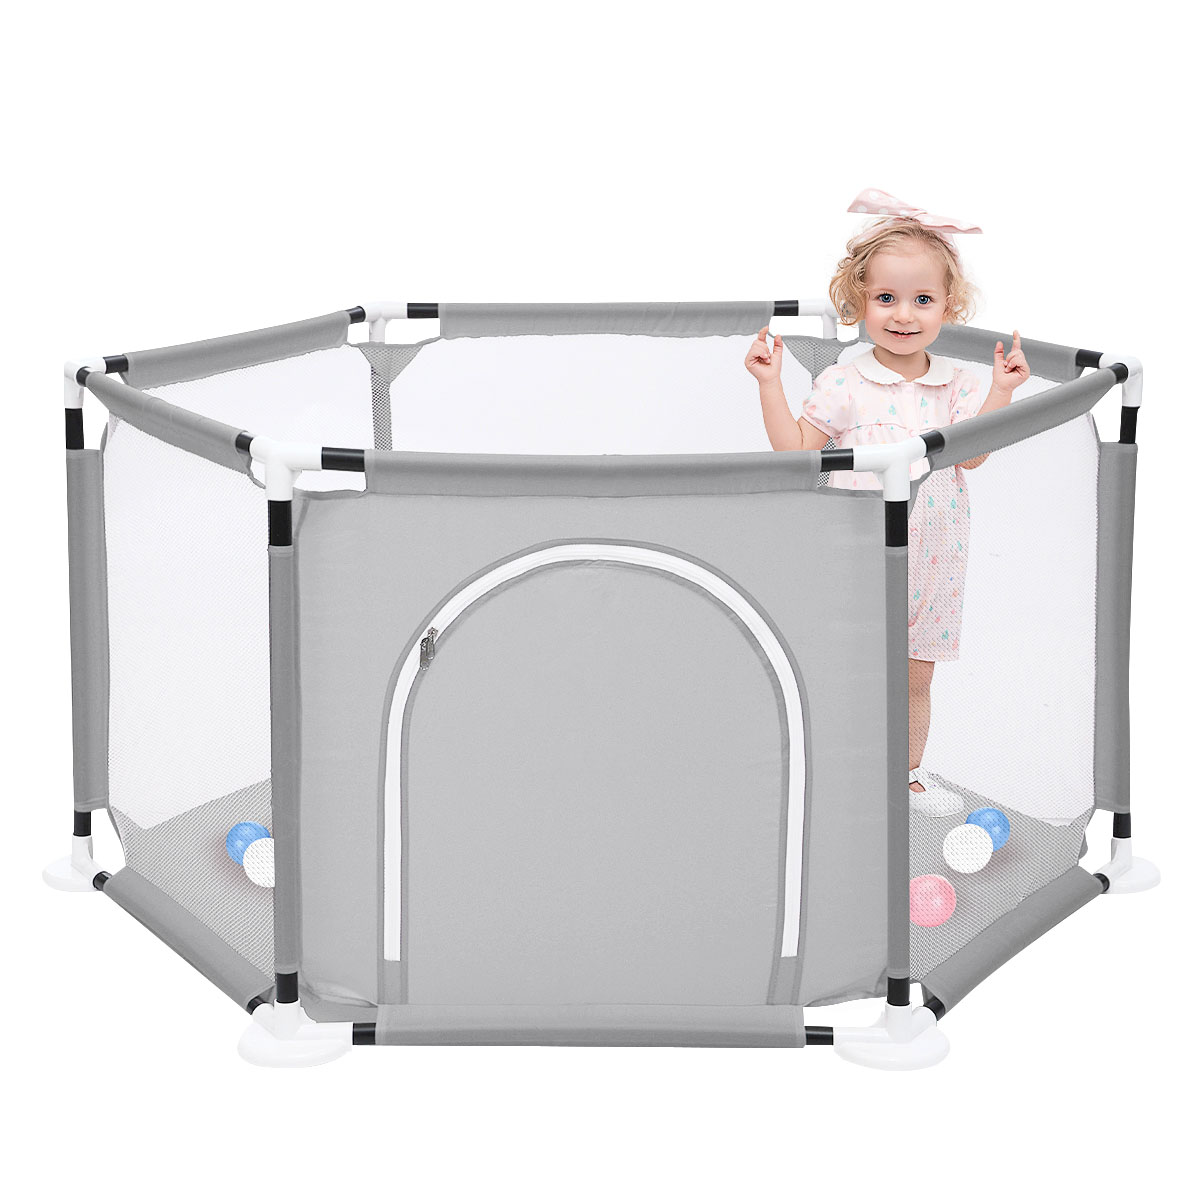 "SINGES Deluxe Portable Baby Playpen, 6-Panel Play Yard with Breathable Mesh & Zipper Door, Indoors or Outdoors Play Space Interactive  Fence for Babies Toddler Infant,Grey" - image 1 of 8